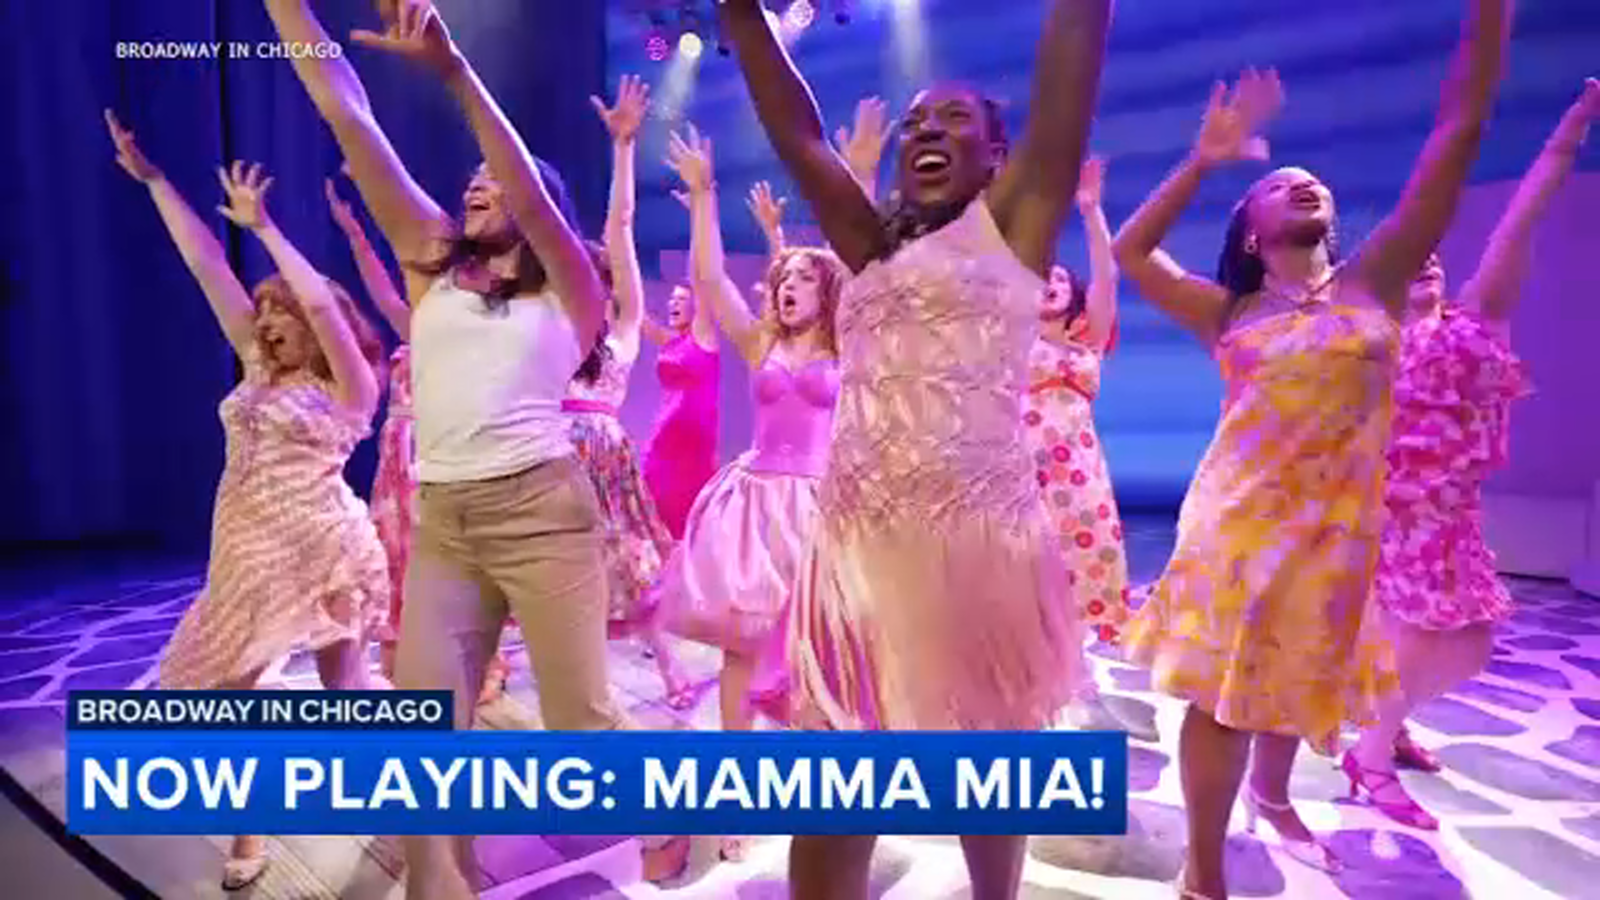 'Mamma Mia!' takes the stage at Nederlander Theatre, starring an Oak Park native